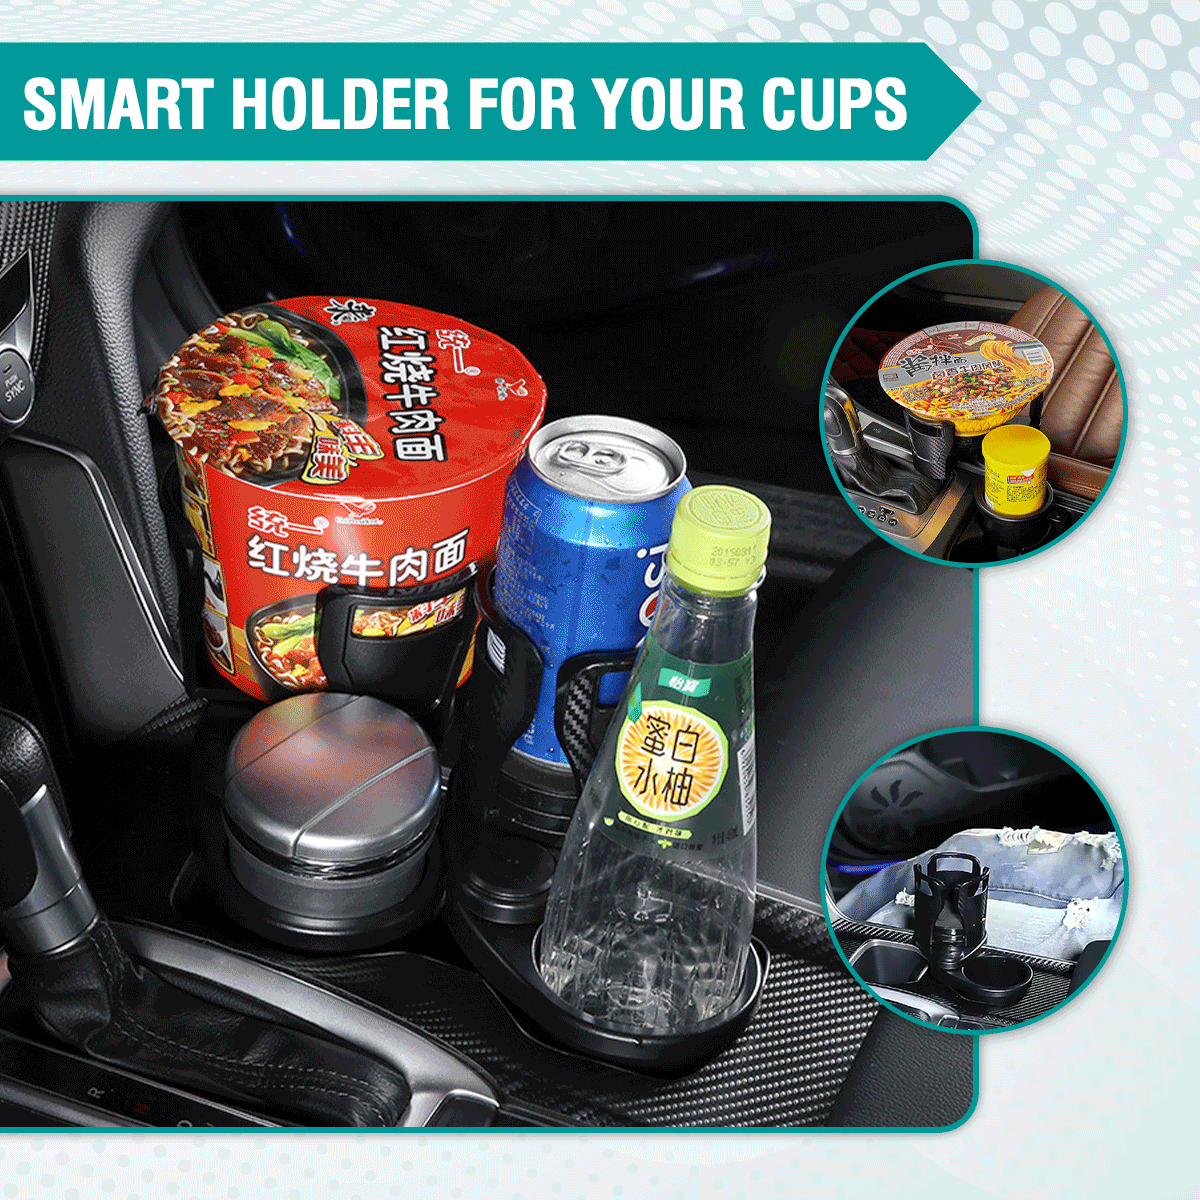 This is a discount for you - 2 In 1 Vehicle-mounted Slip-proof Cup Holder 360 Degree Rotating